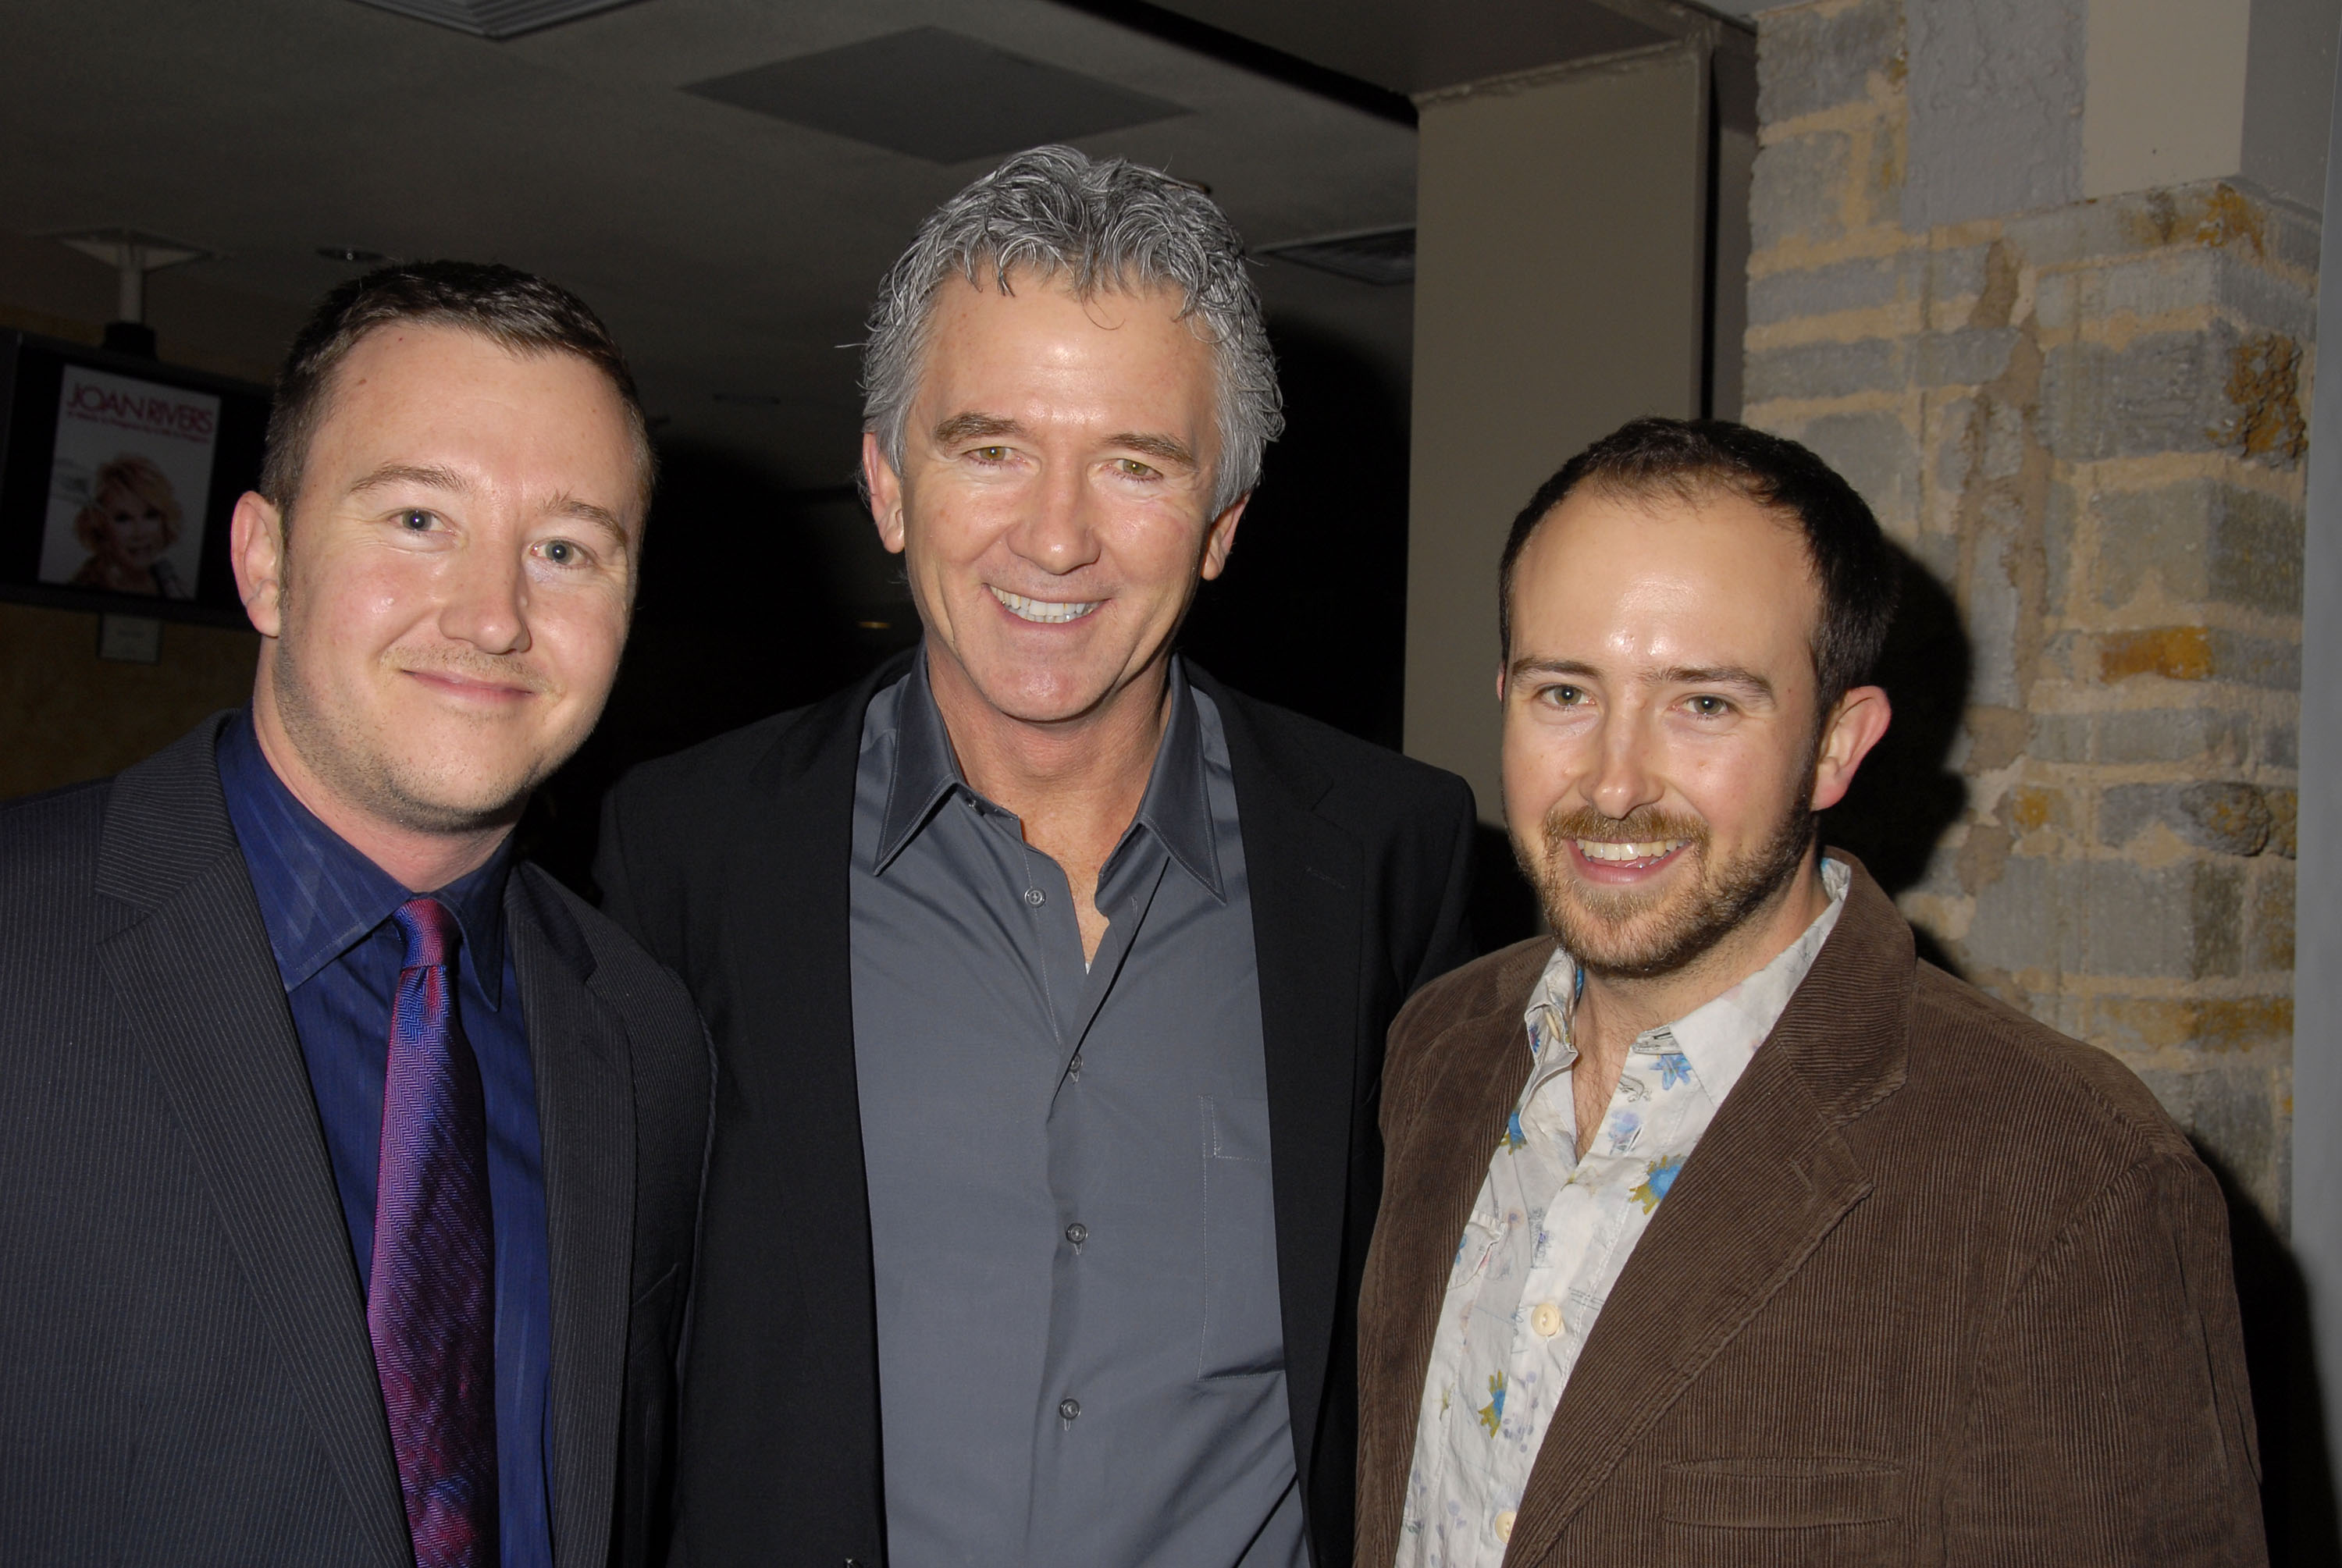 Padraic, Patrick, and Conor Duffy at the opening night of "Joan Rivers: A Work in Progress By A Life in Progress" in Los Angeles, 2008 | Source: Getty Images